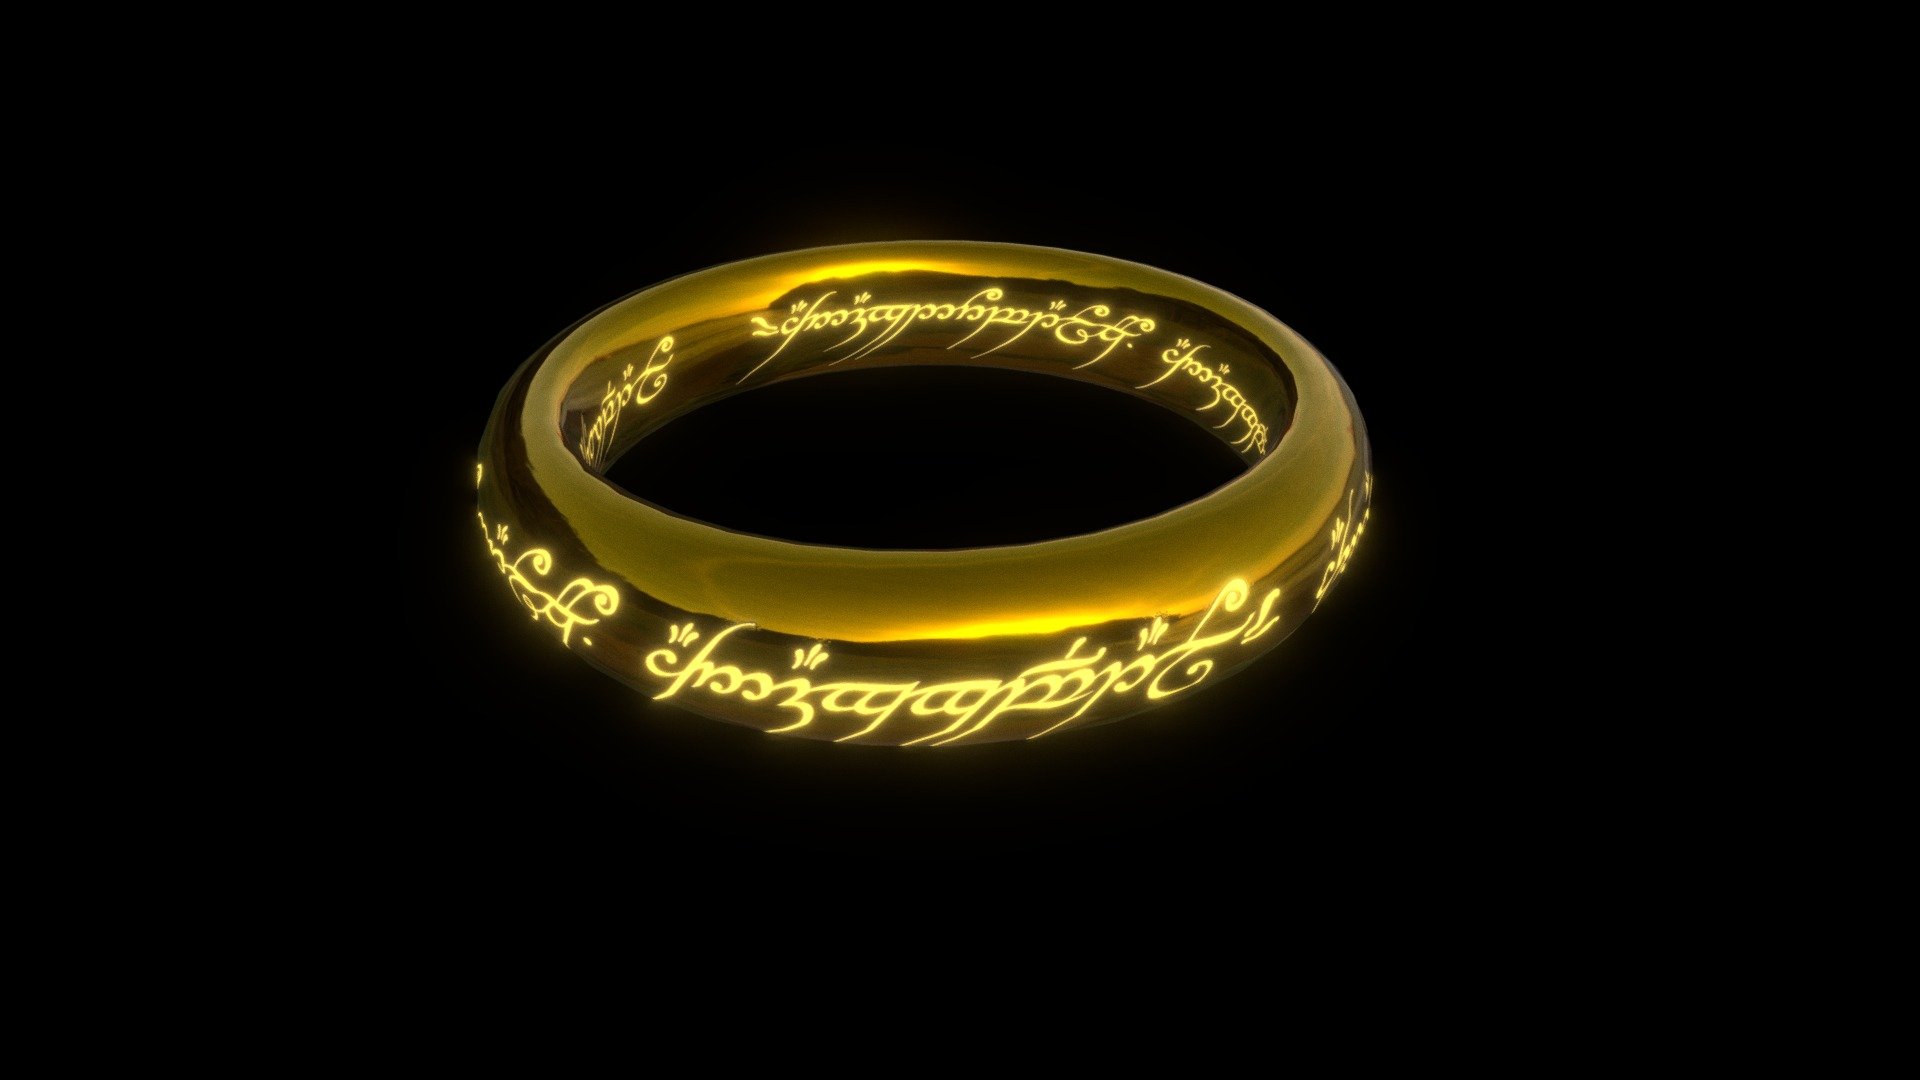 The one Ring - 3D model by Davetheconqueror [0198122] - Sketchfab